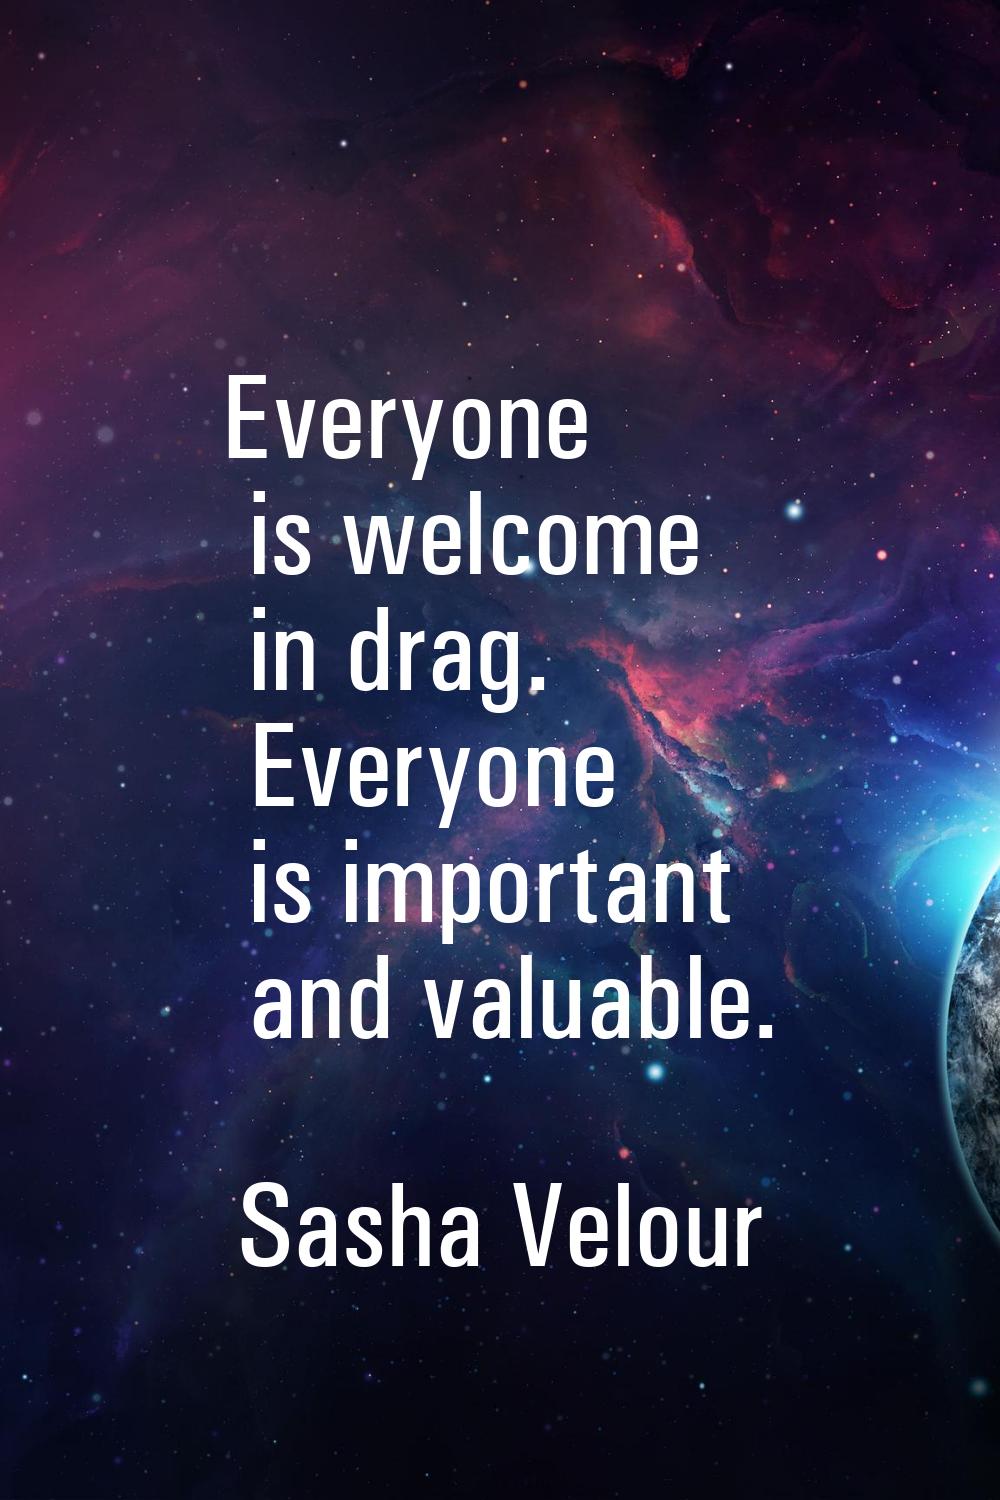 Everyone is welcome in drag. Everyone is important and valuable.